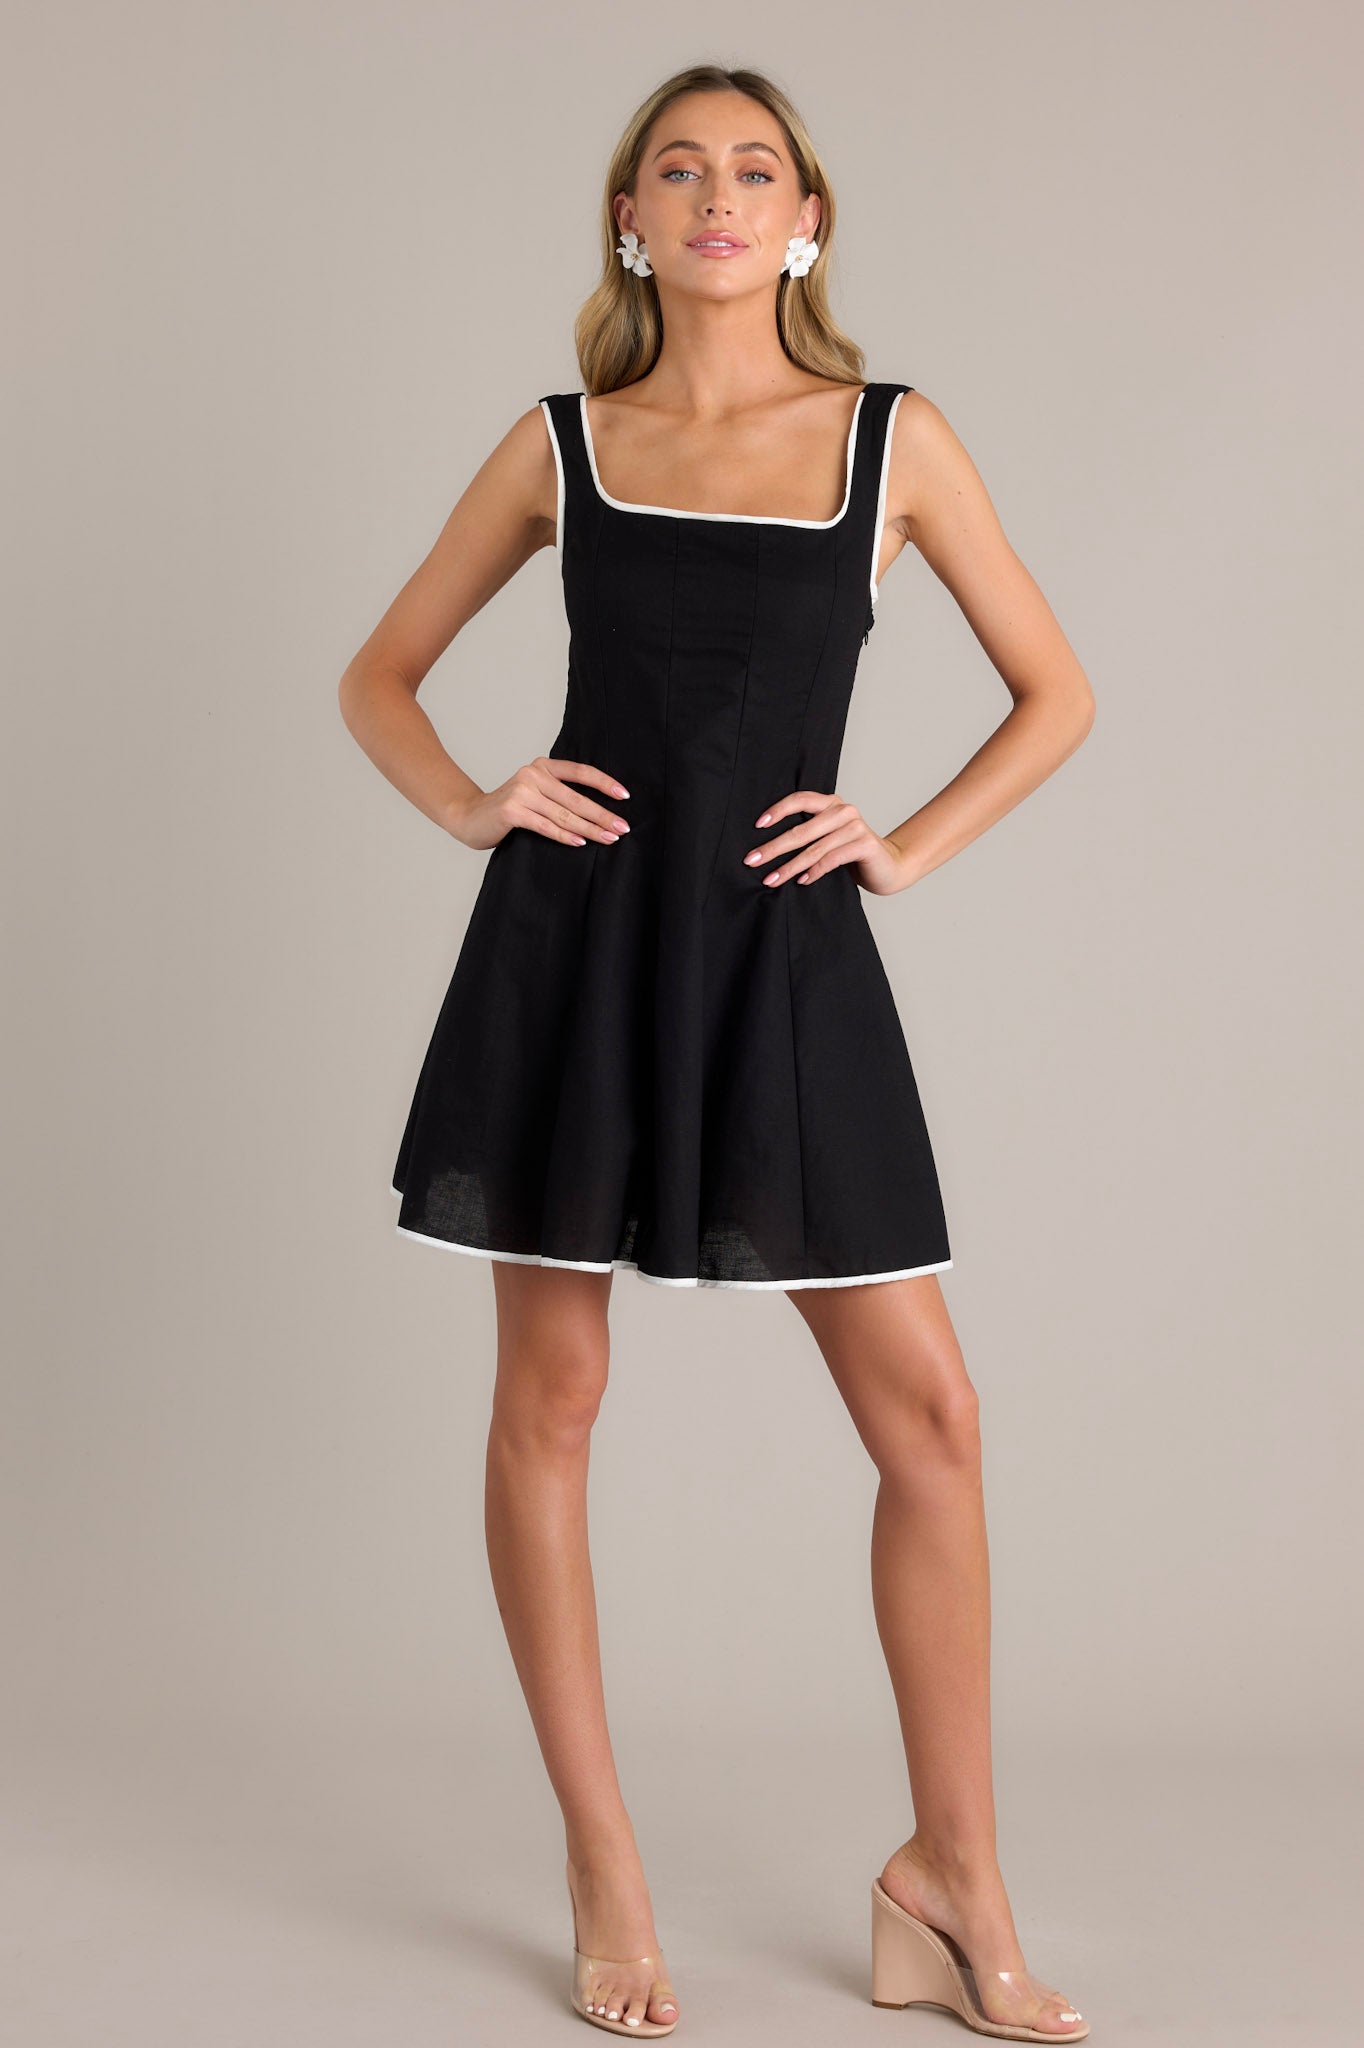 Full body shot of a black mini dress with a square neckline, thick adjustable straps, and a flattering A-line silhouette with contrasting white trim.